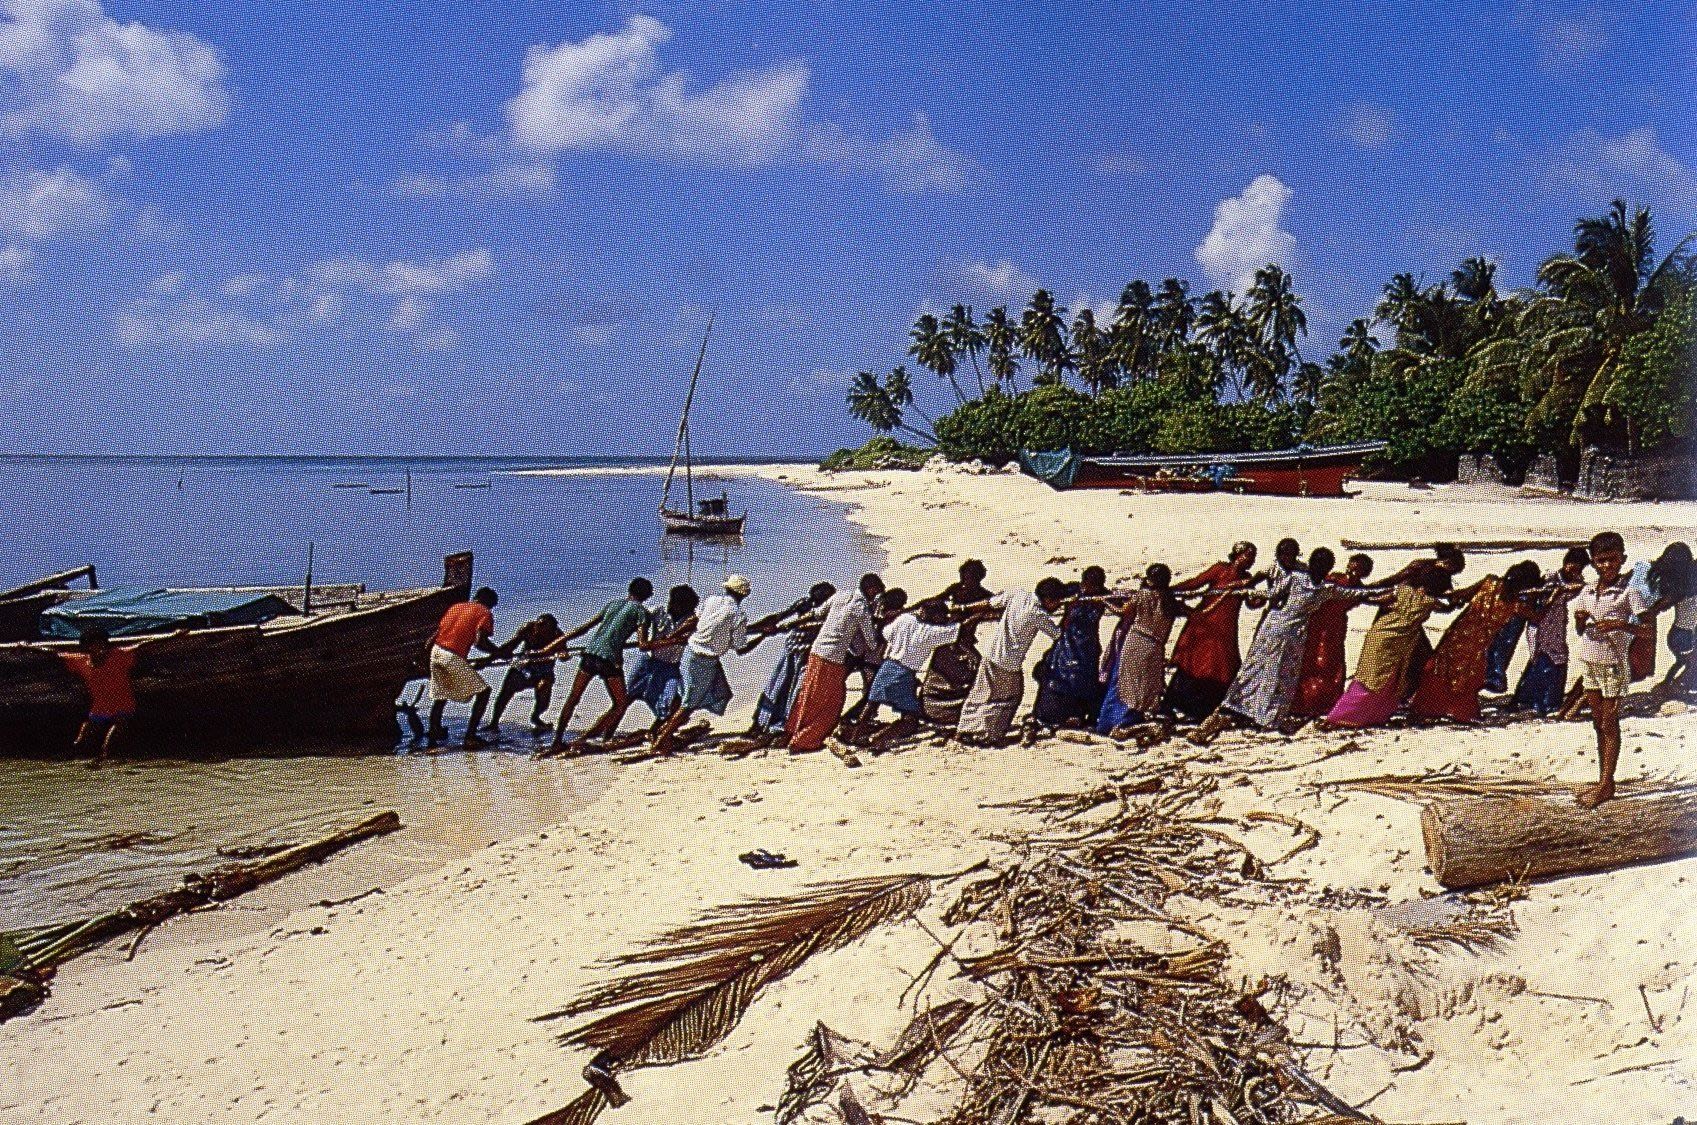 Image from book ‘Maldives Impressions’ by Ismail Abdulla